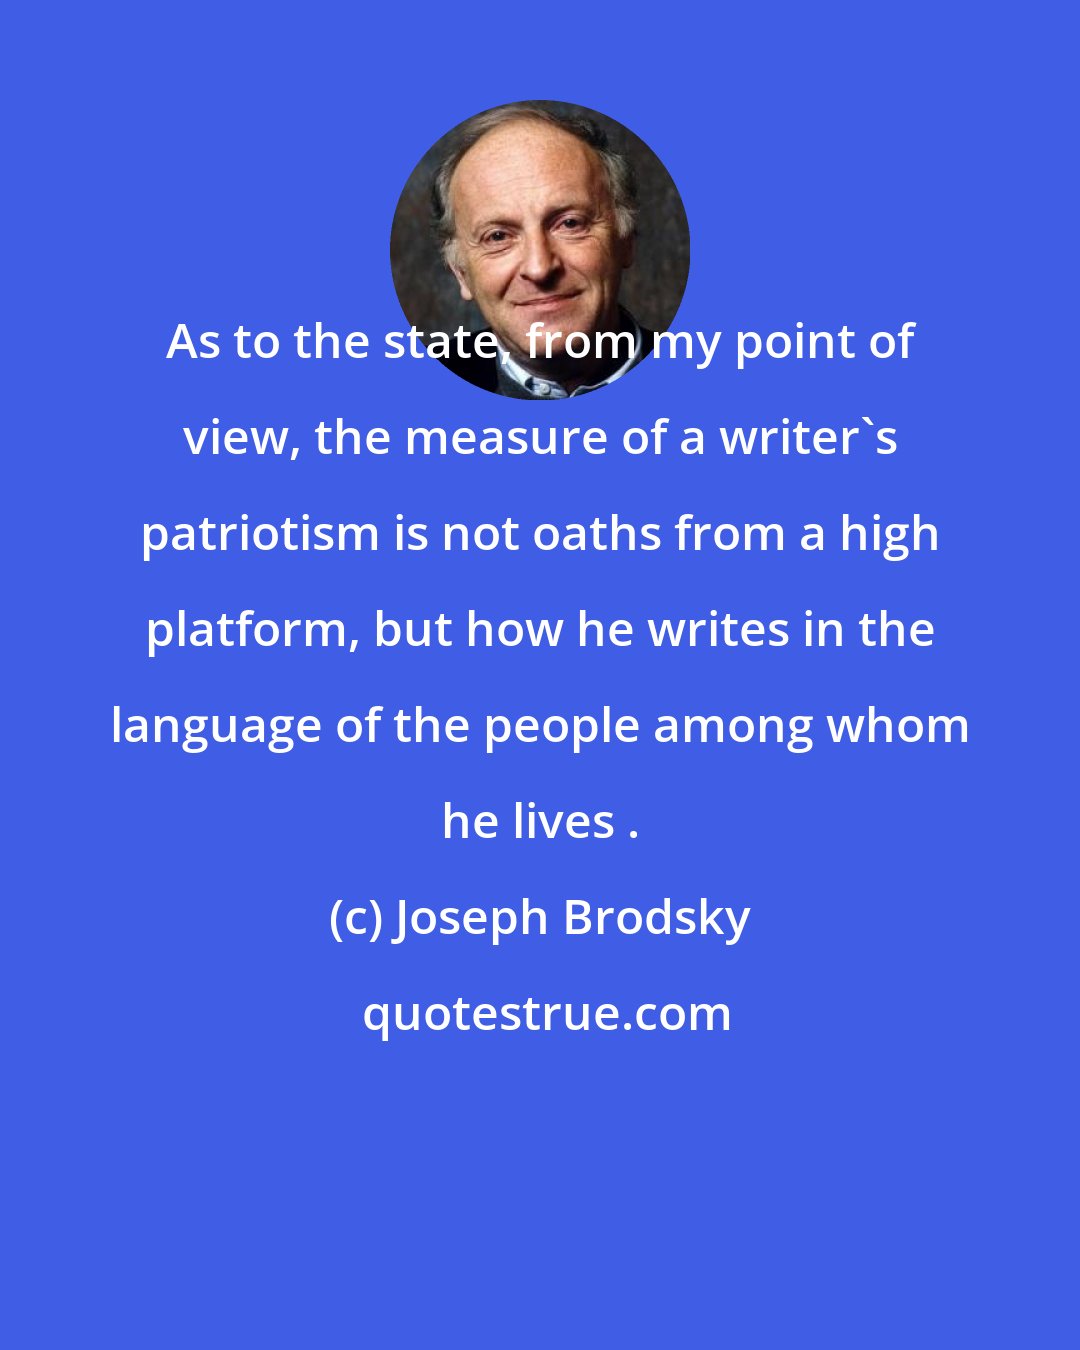 Joseph Brodsky: As to the state, from my point of view, the measure of a writer's patriotism is not oaths from a high platform, but how he writes in the language of the people among whom he lives .